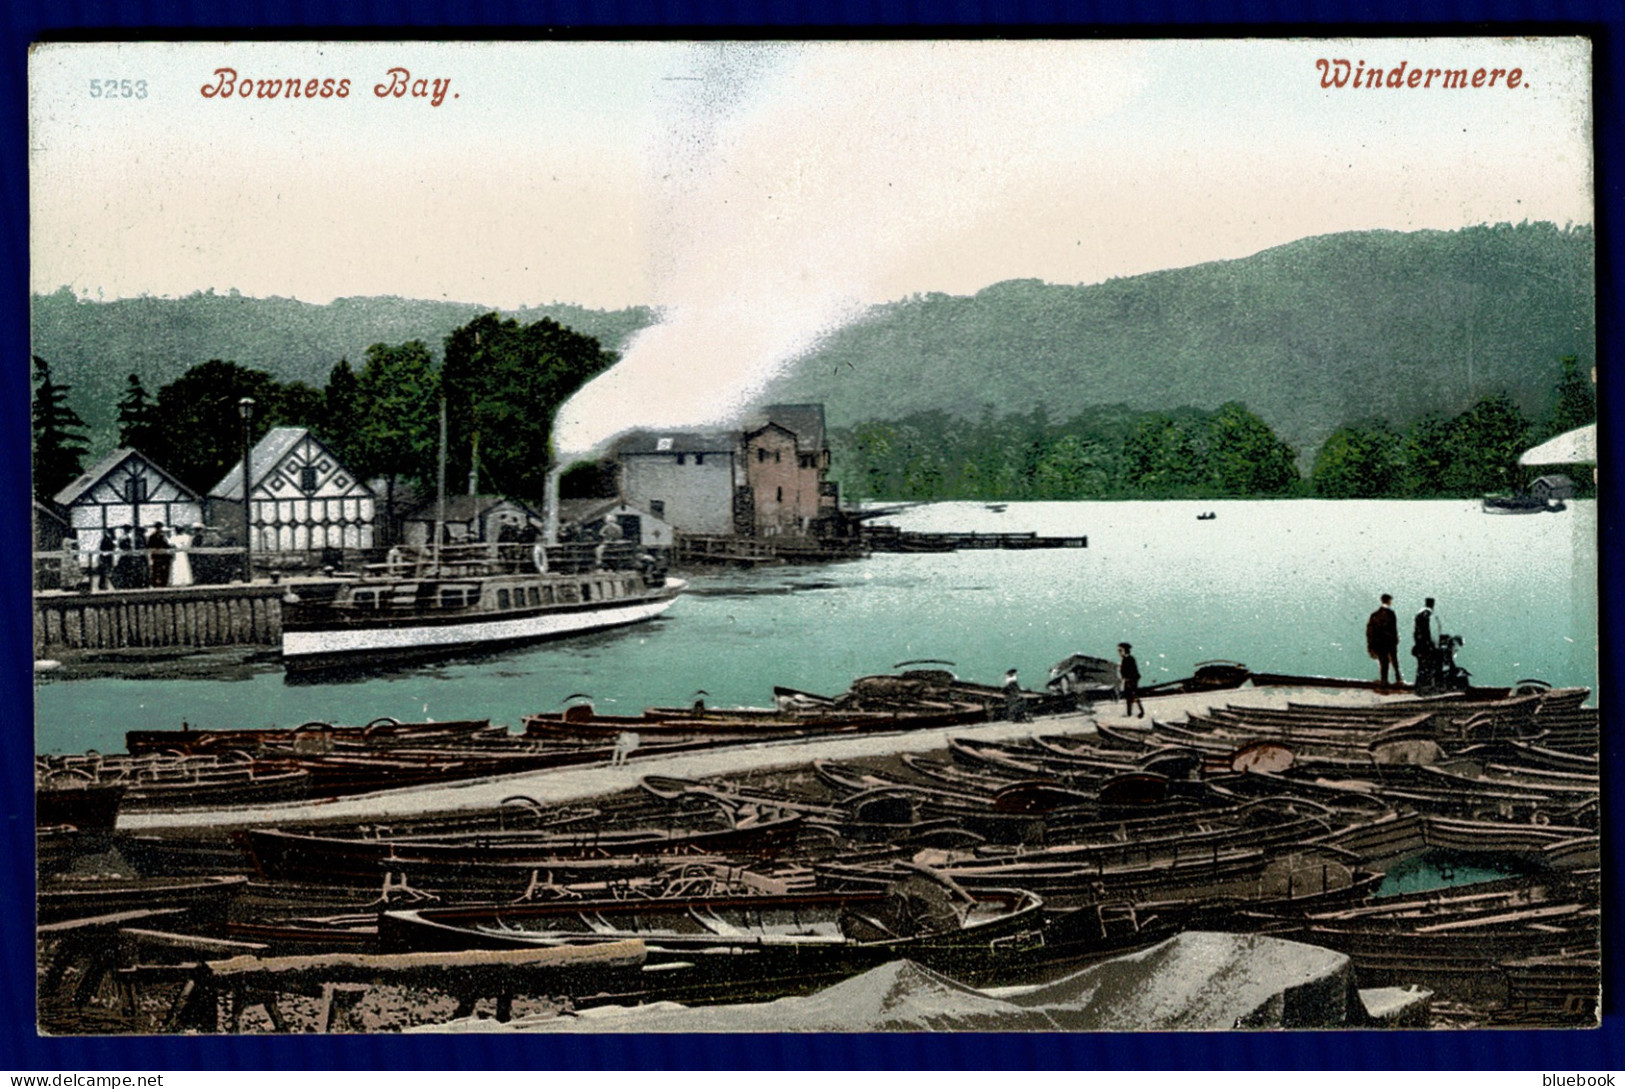 Ref 1617 - Early Postcard - Steam Boat Bowness Bay - Windermere Lake District Cumbria - Windermere